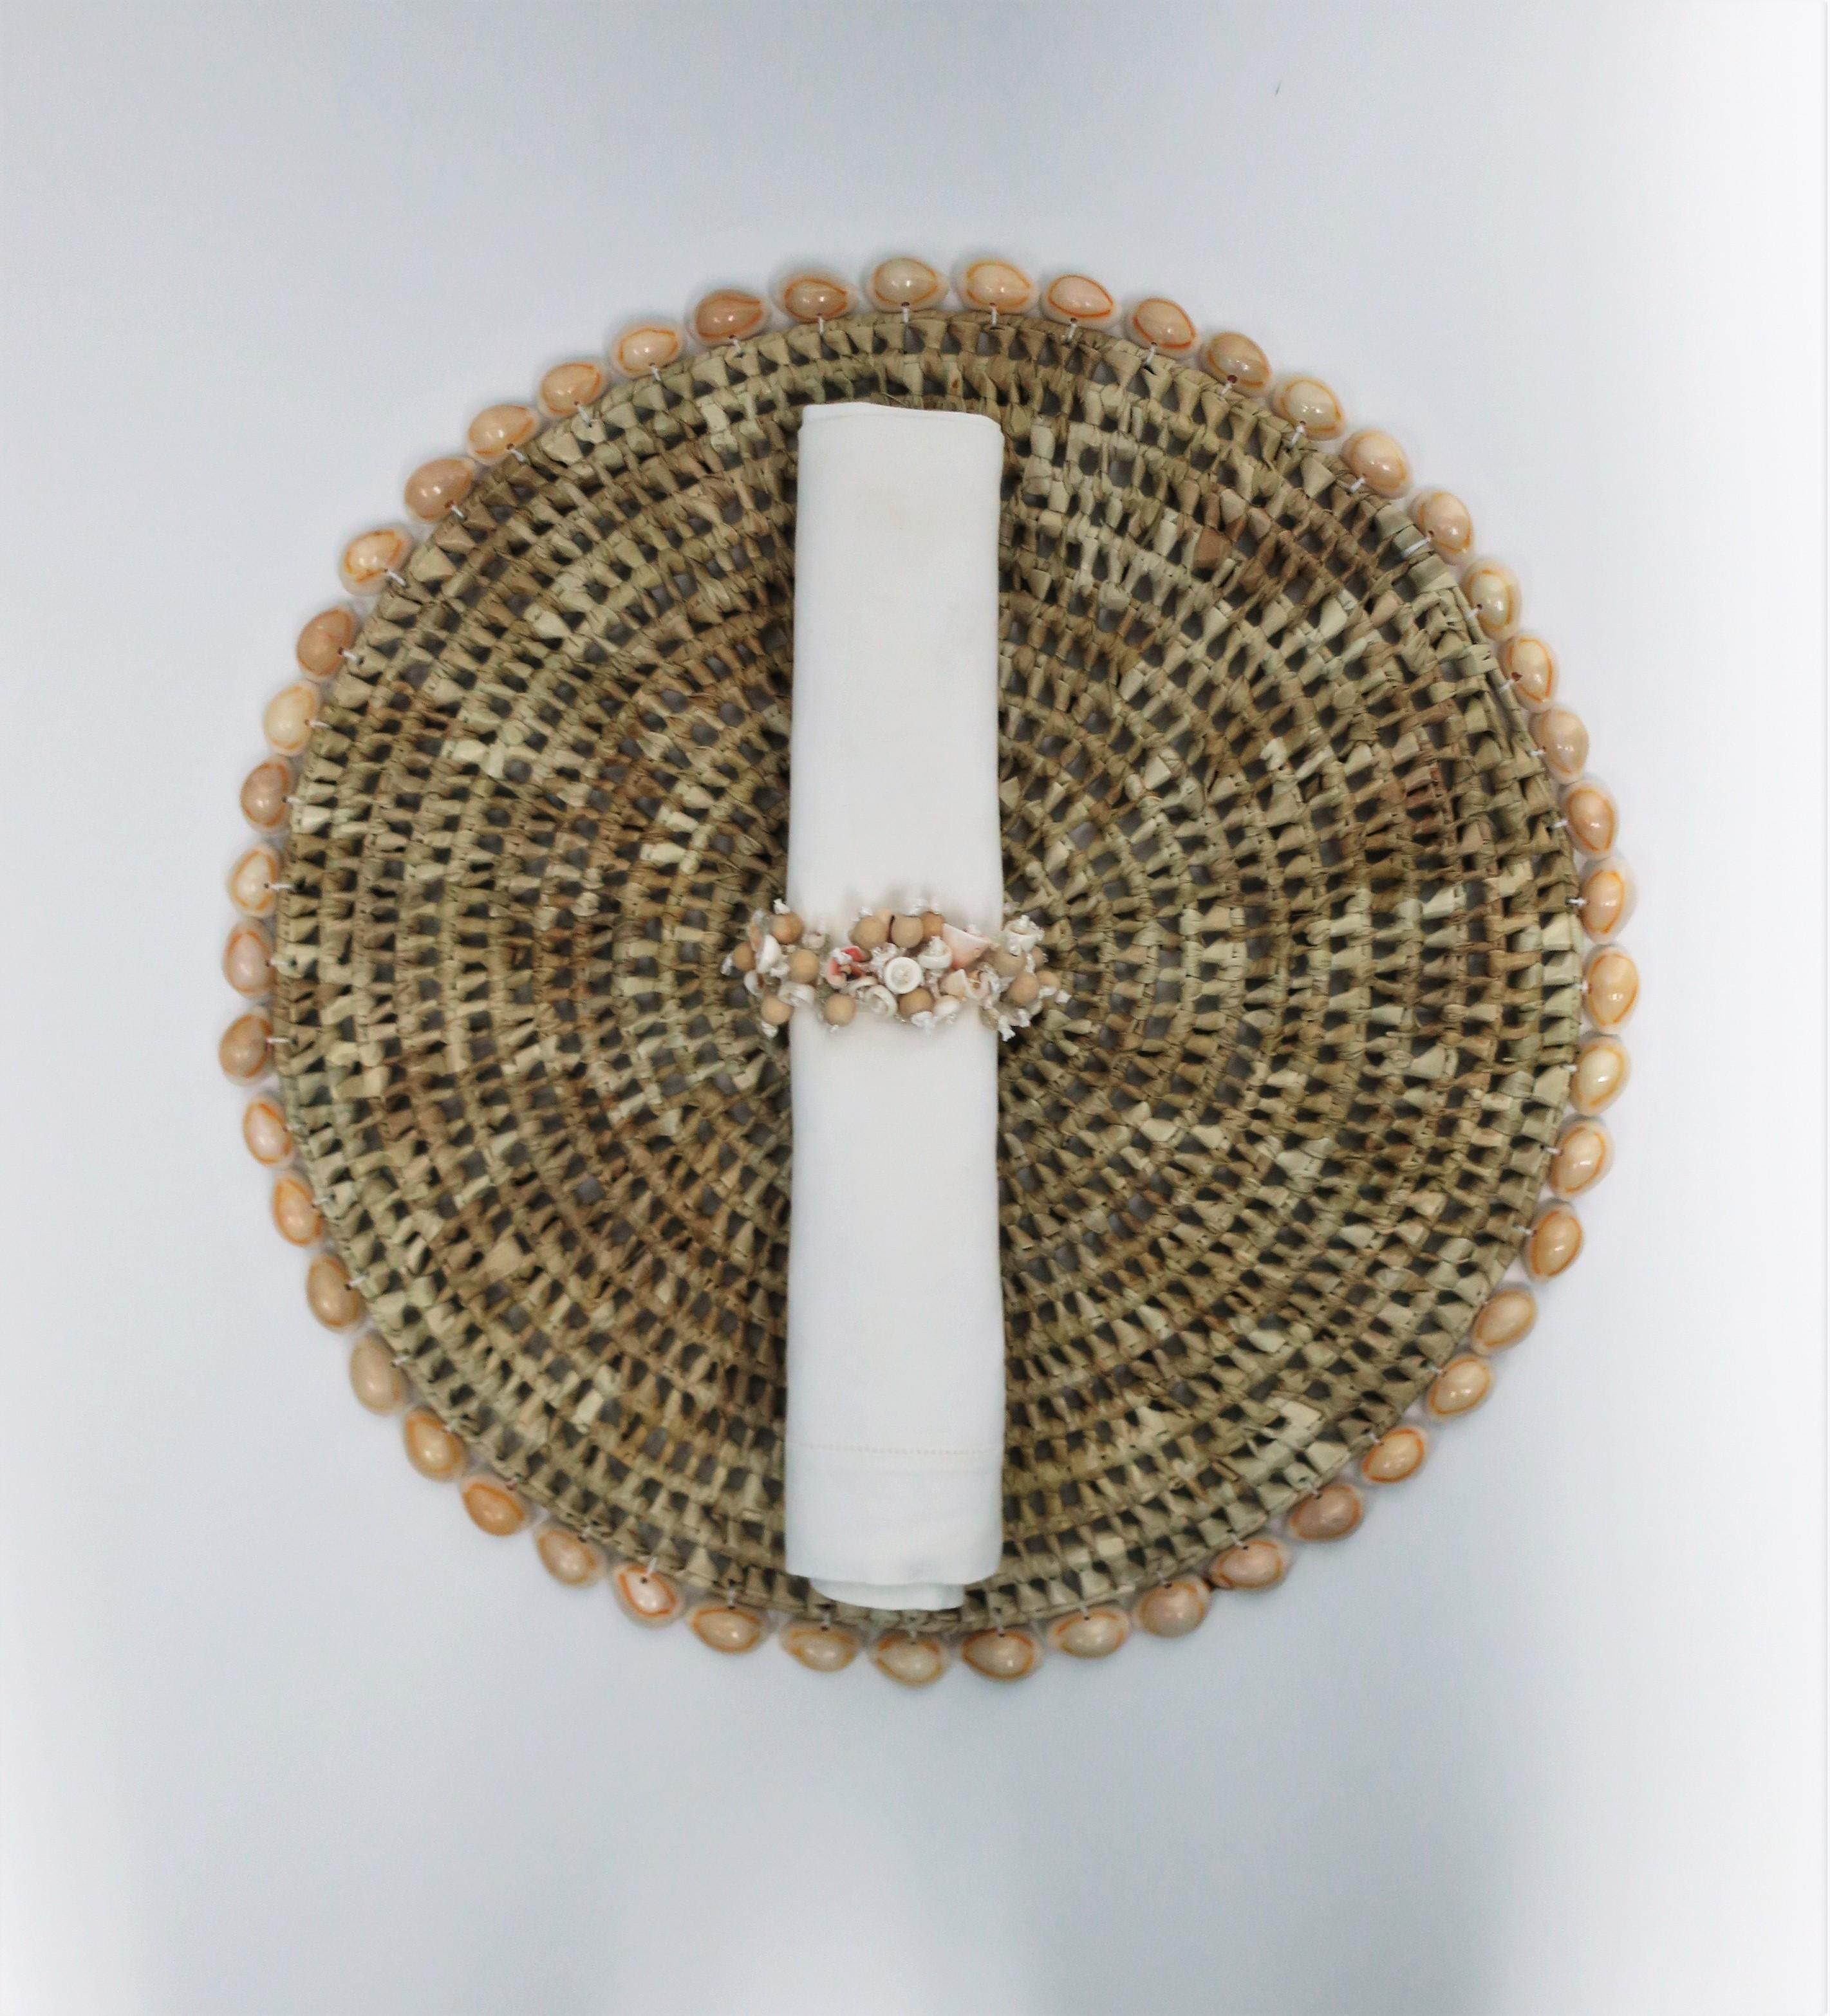 Shell Seashell and Wicker Placemats or Dinner Plate Chargers, Set of 12